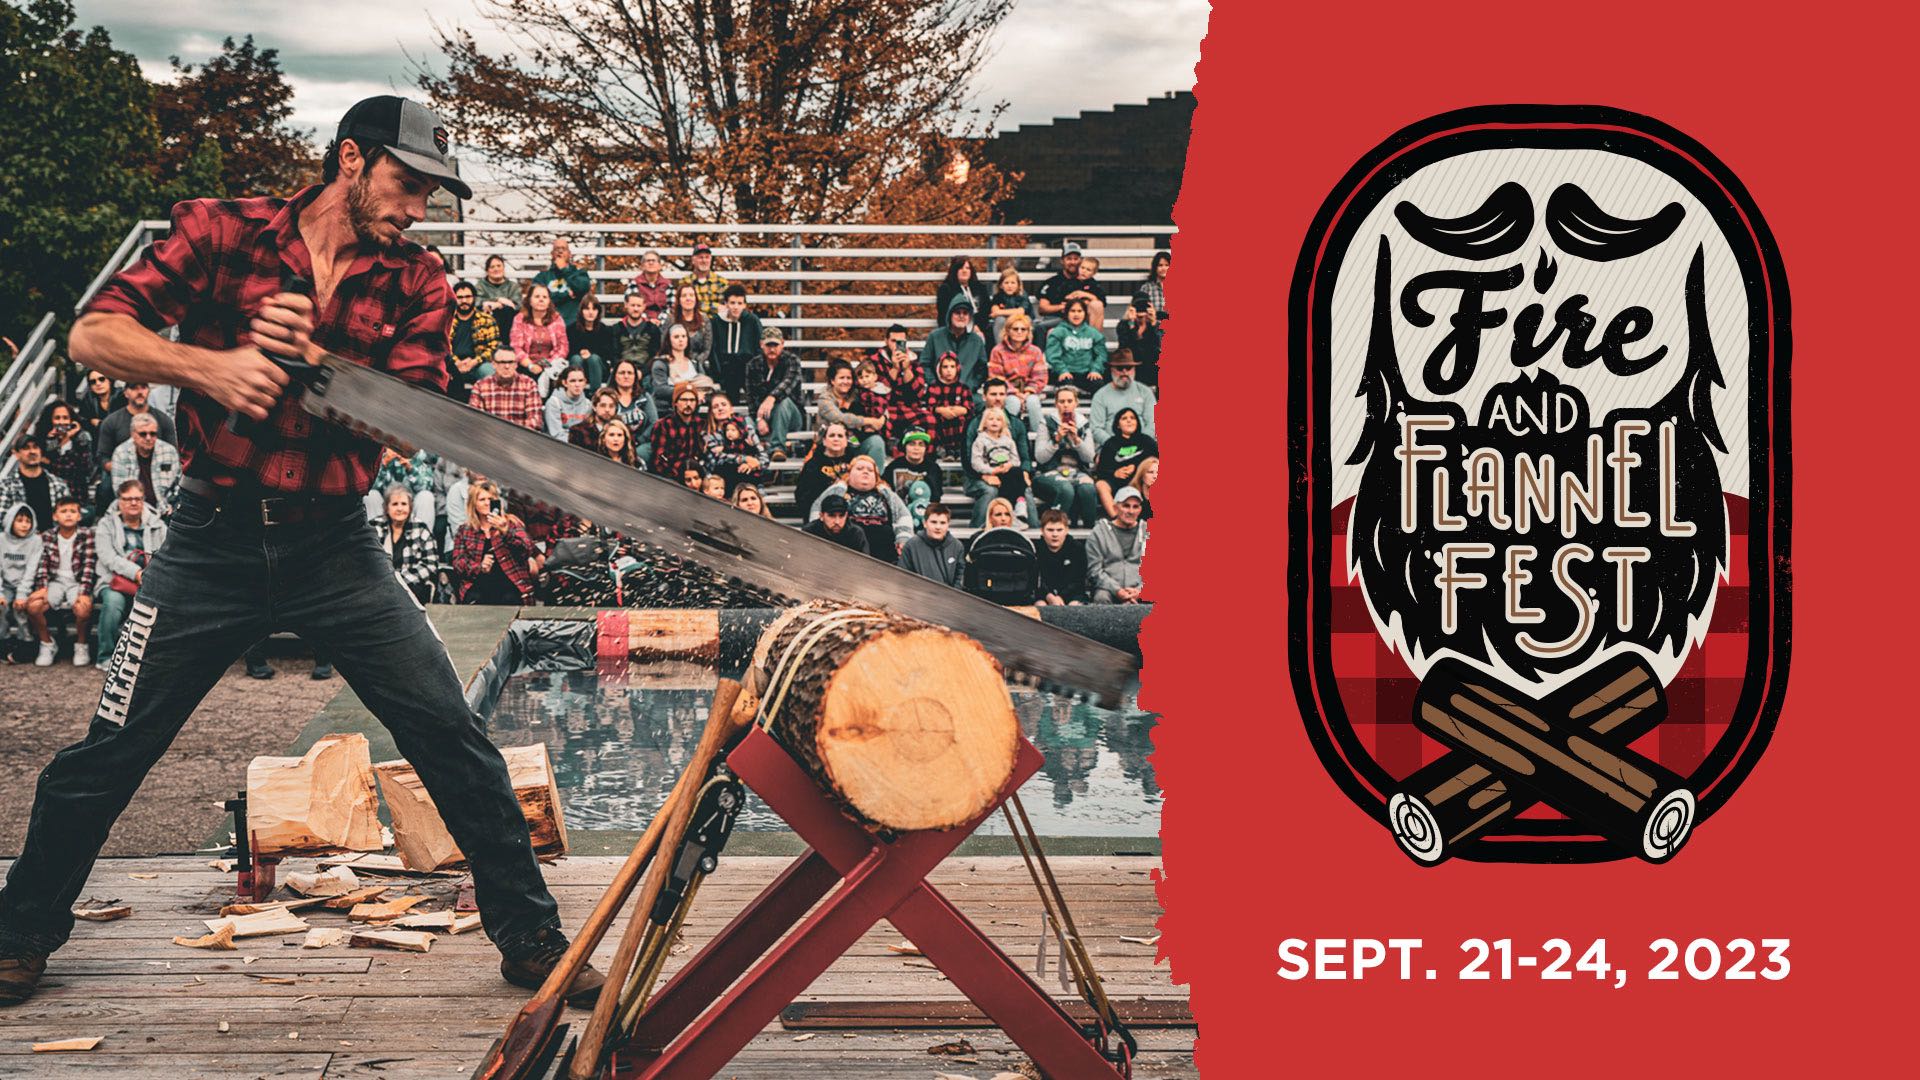 Fire & Flannel Fest, Sept. 21-24, 2023. Logo overlyaing image of man in flannel using a giant saw to cut a large log